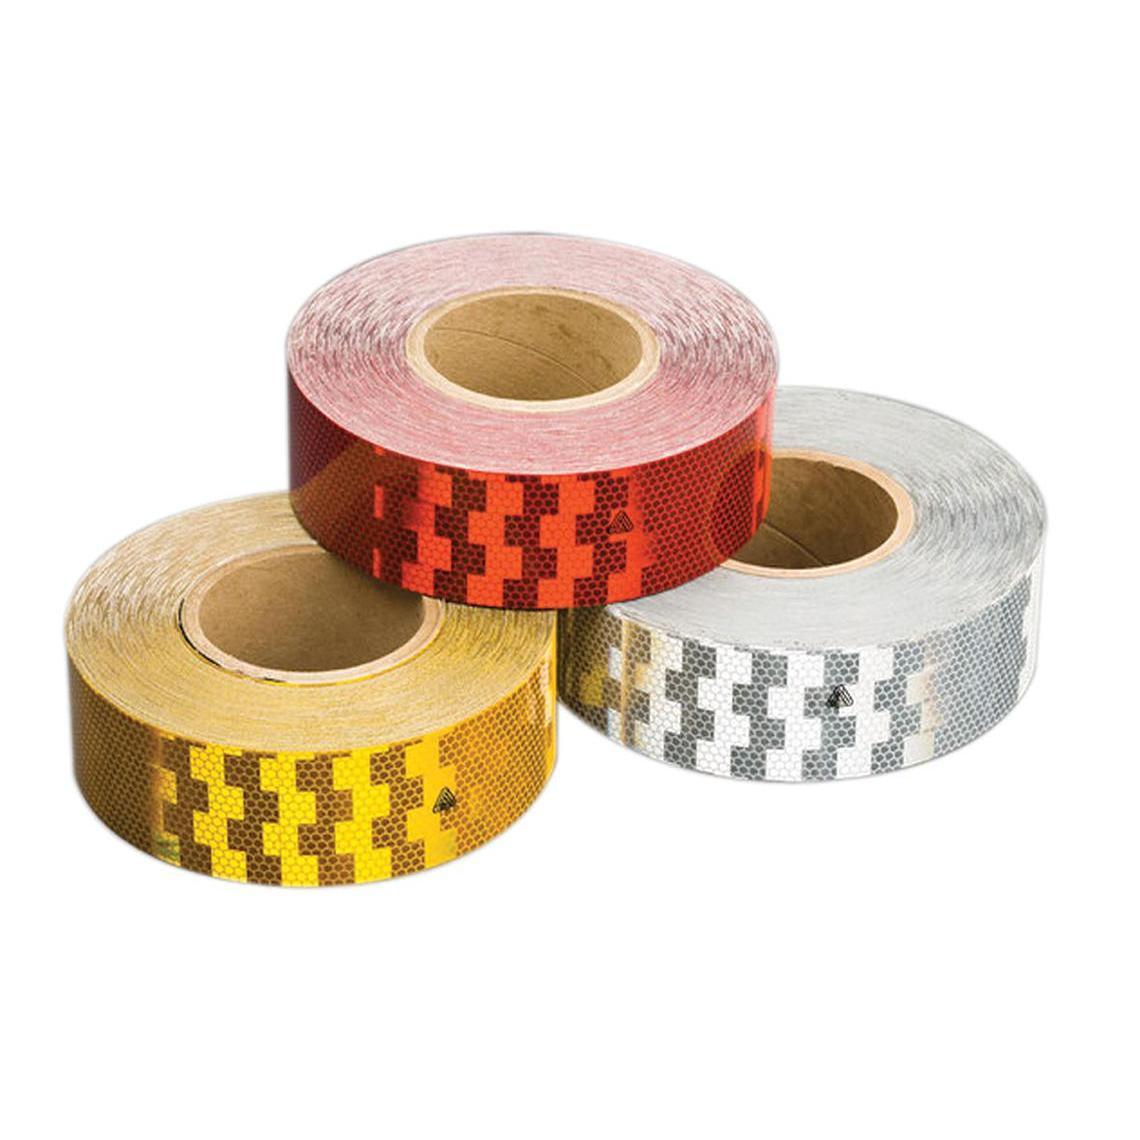 Reflective Conspicuity Tape Non-SABS p/meter-Hardware Tape-MTS-diyshop.co.za